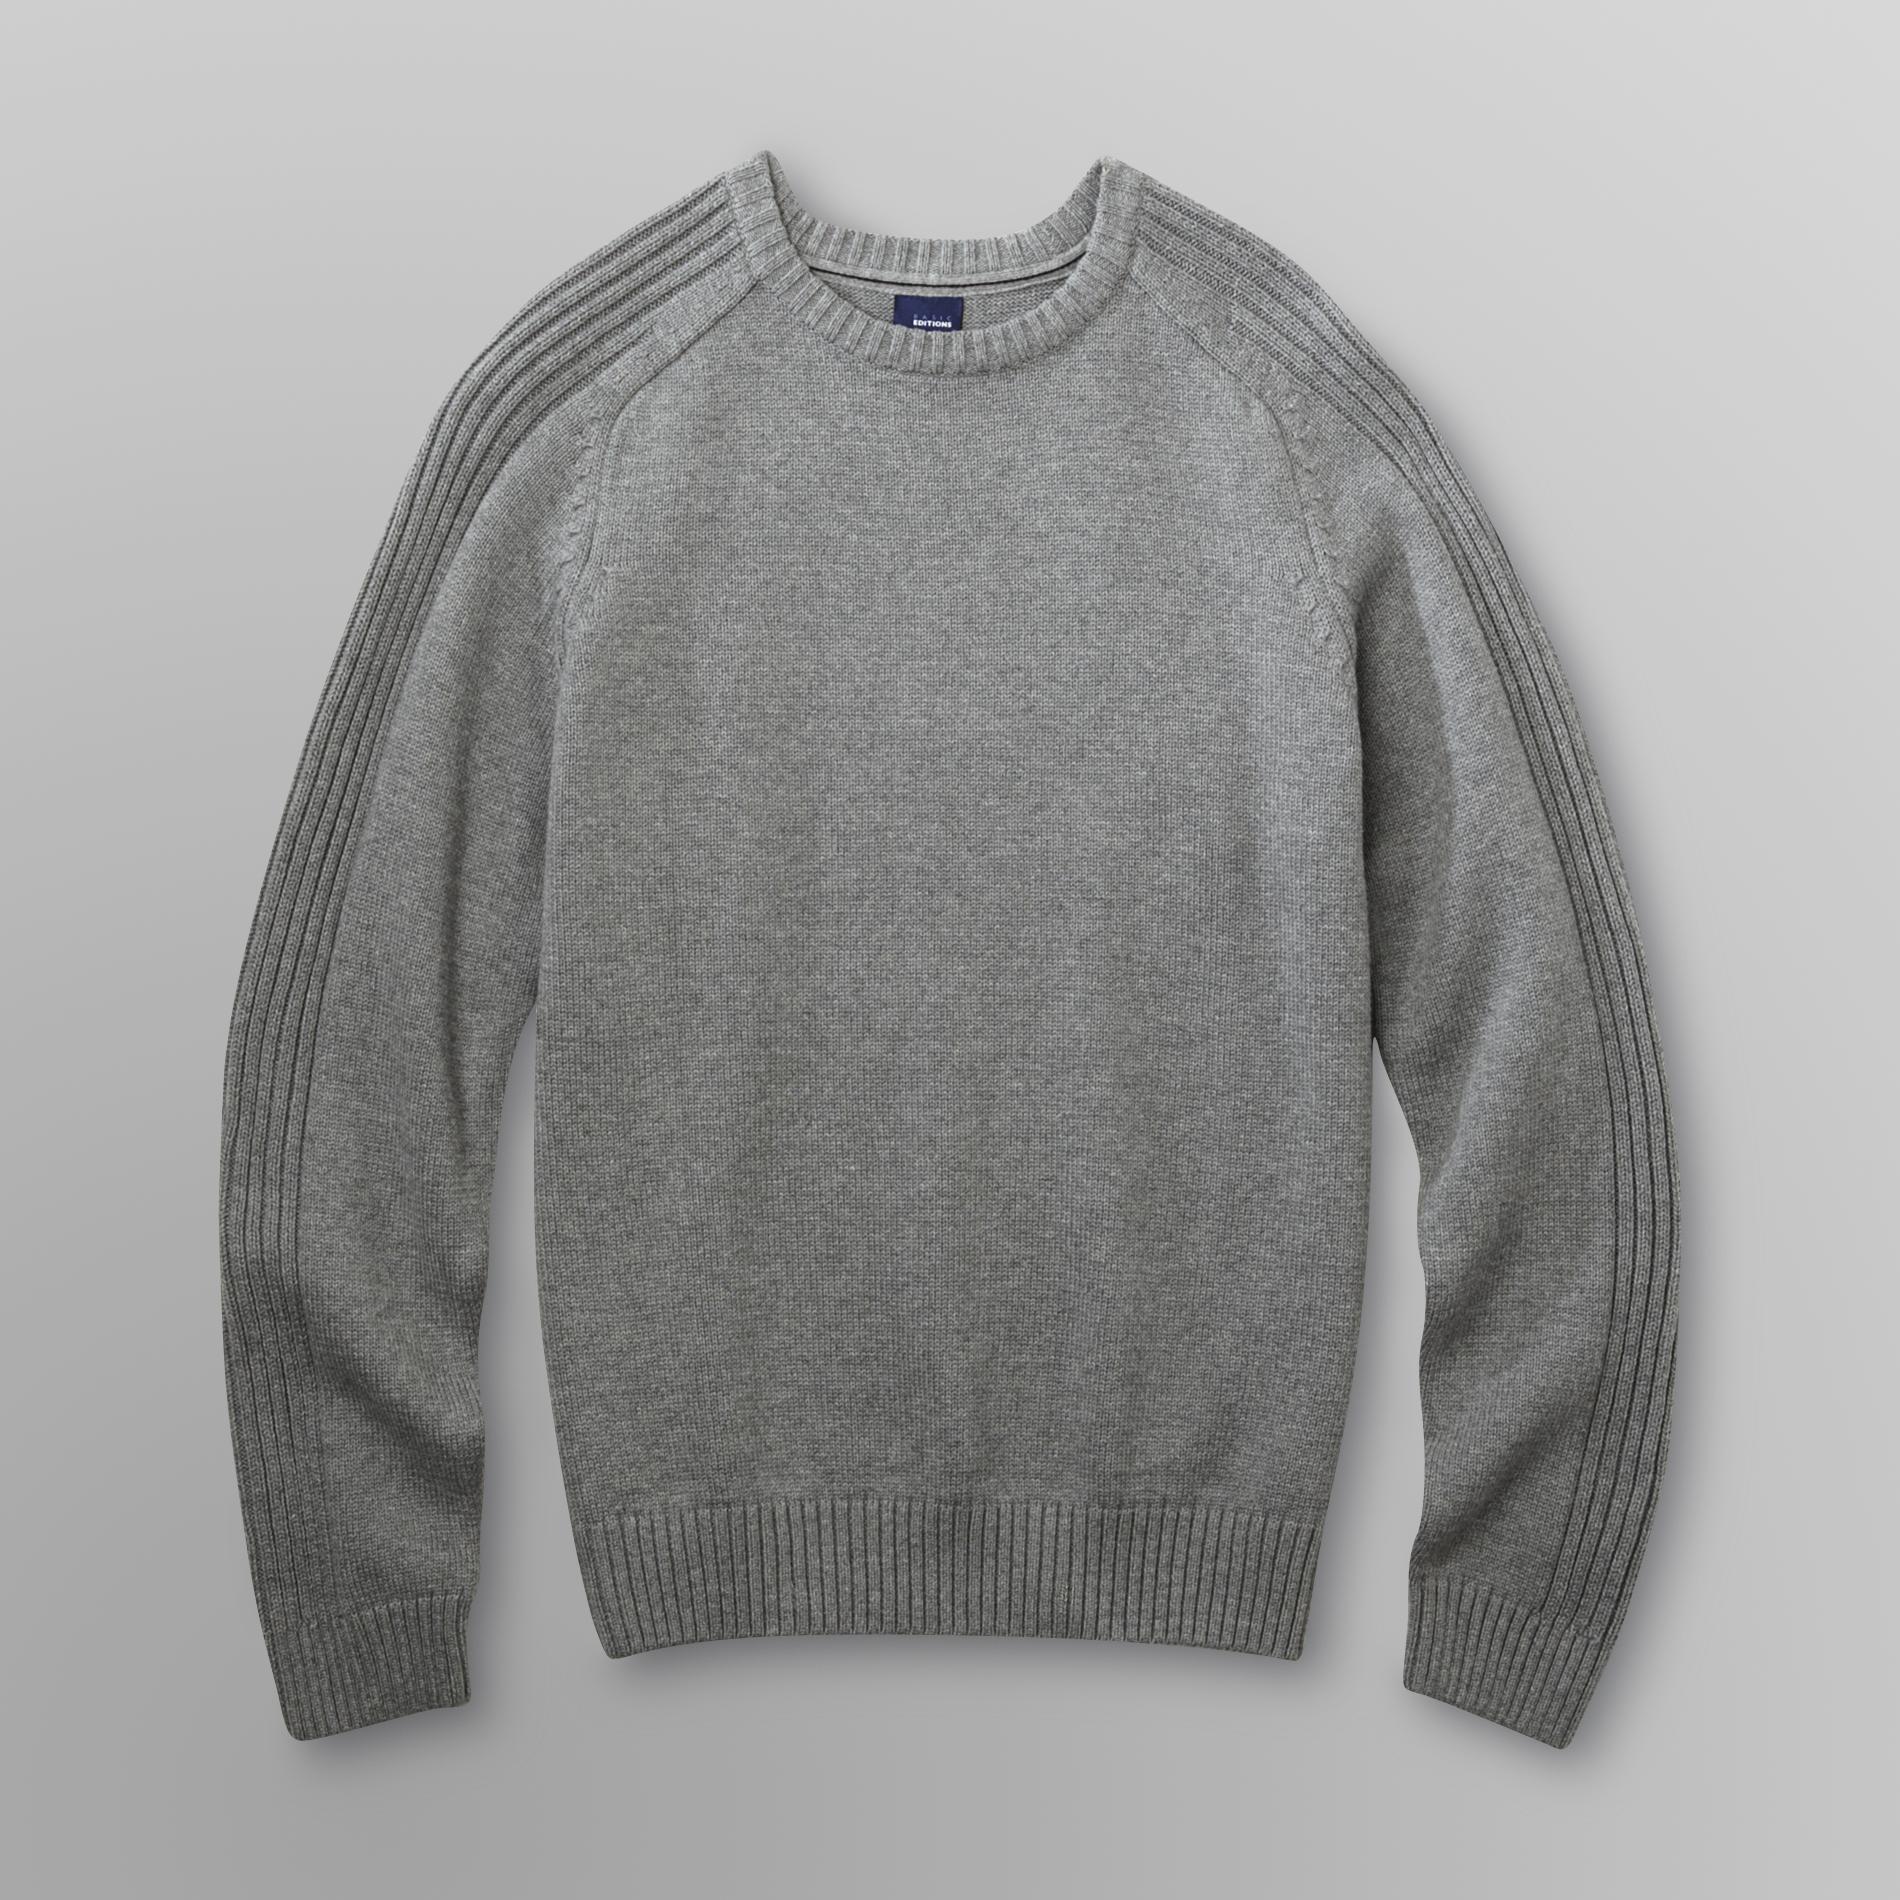 Basic Editions Men's Woven Sweater